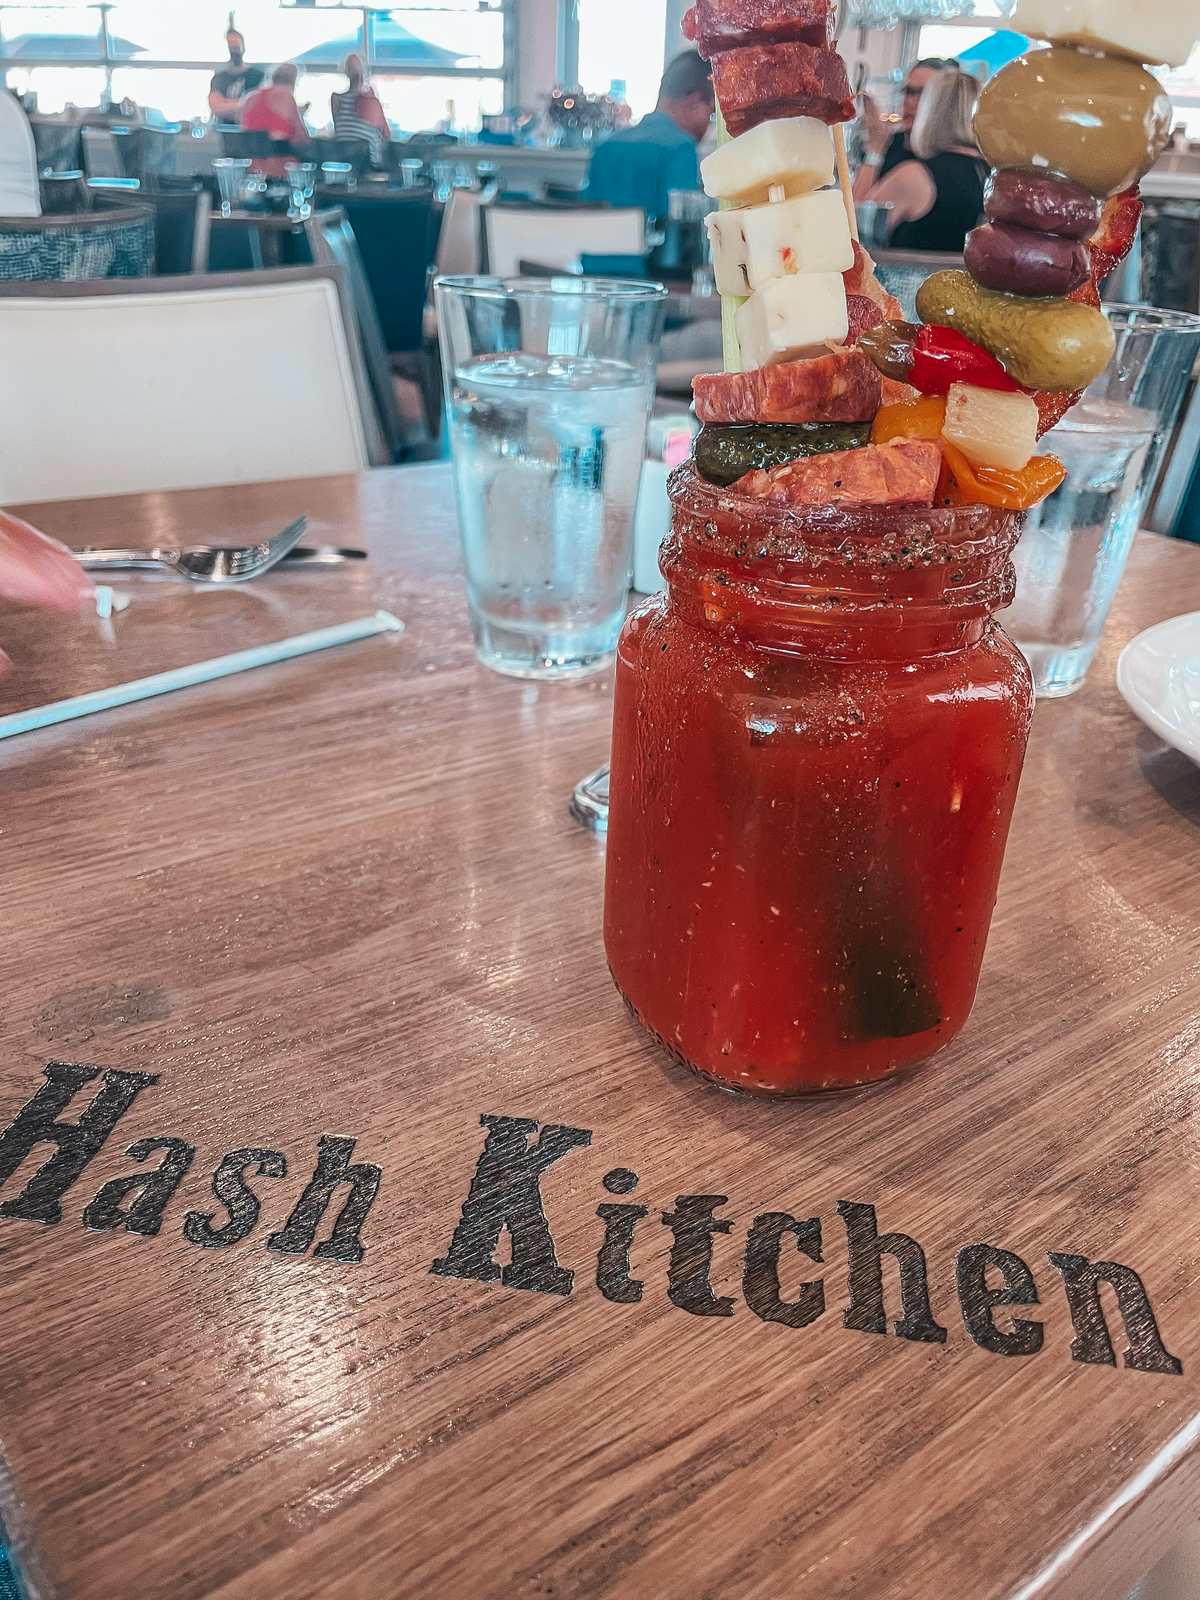 Bloody mary with tons of fixins' from Hash Kitchen